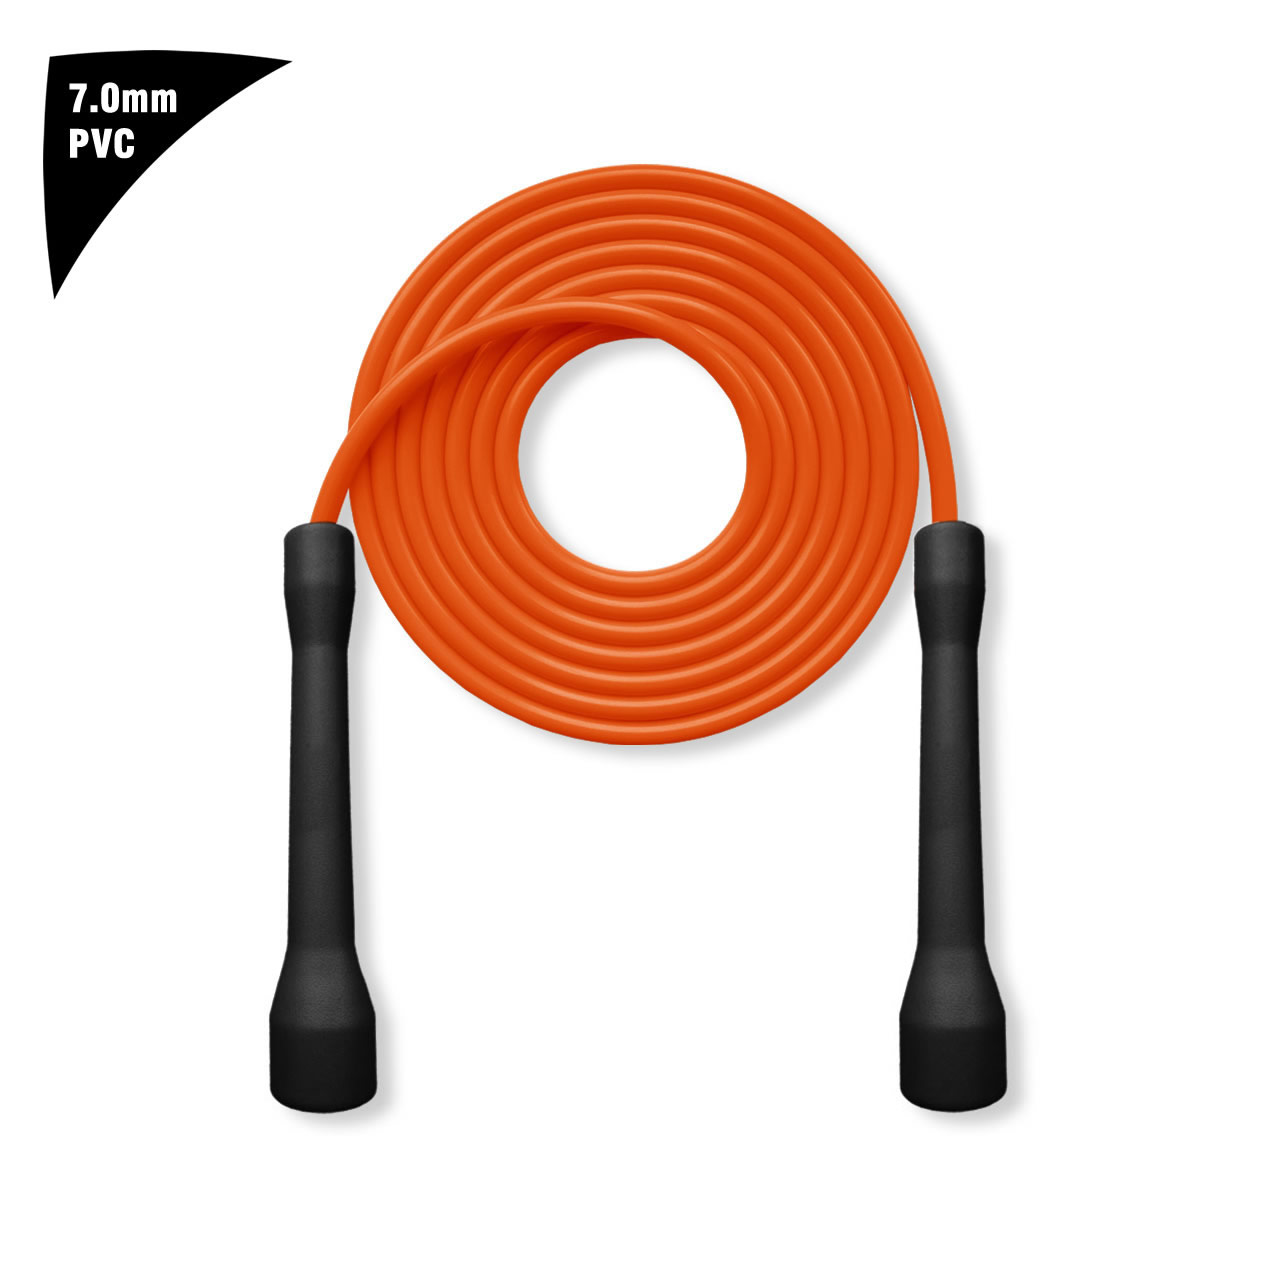 Are there specific chinese jump rope designed for different types of exercises or fitness levels?